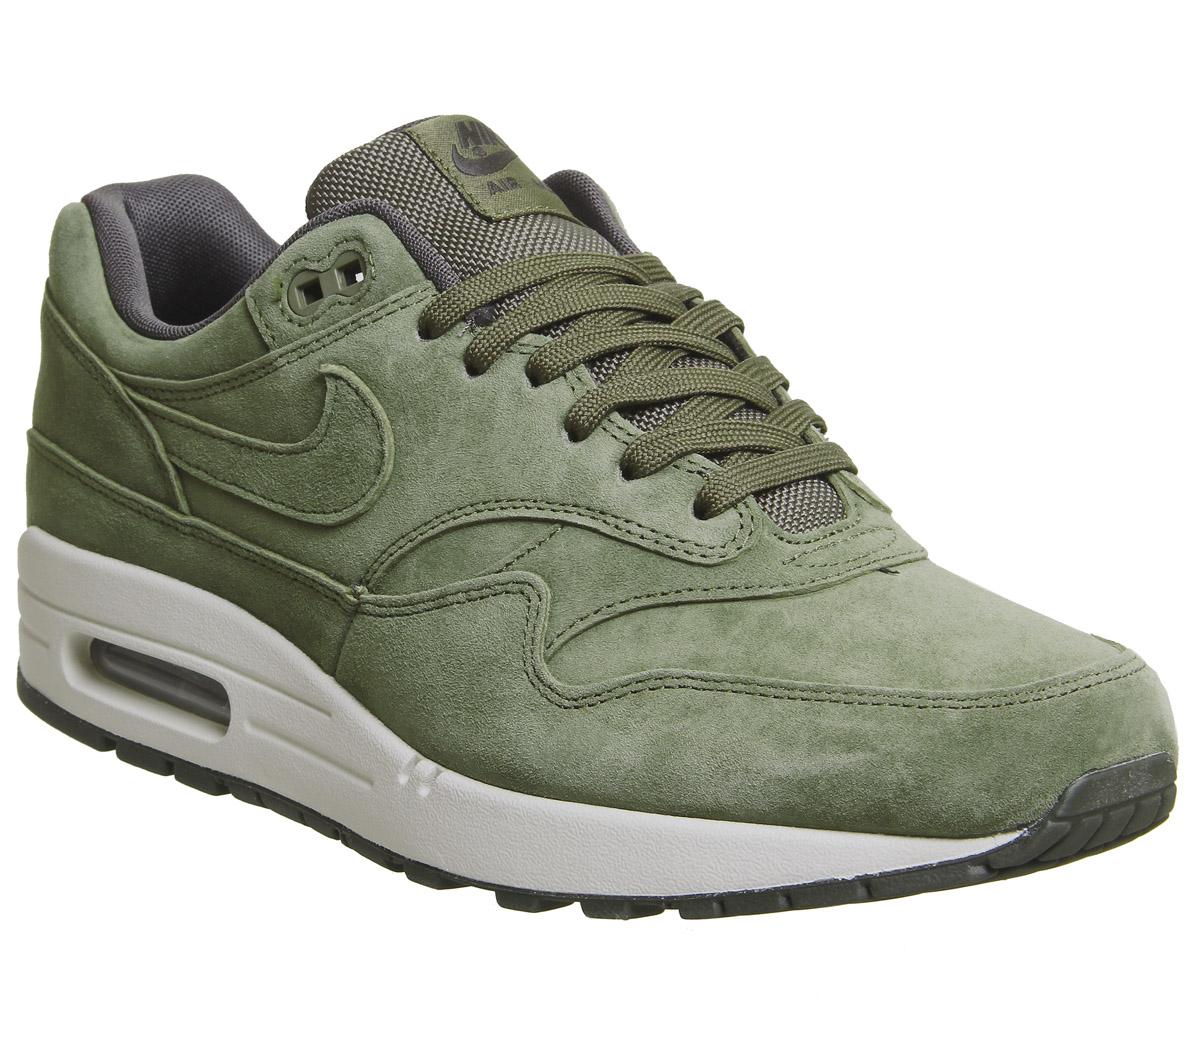 Nike Air Max 1 Trainers Olive Sequoia Light Bone His Trainers